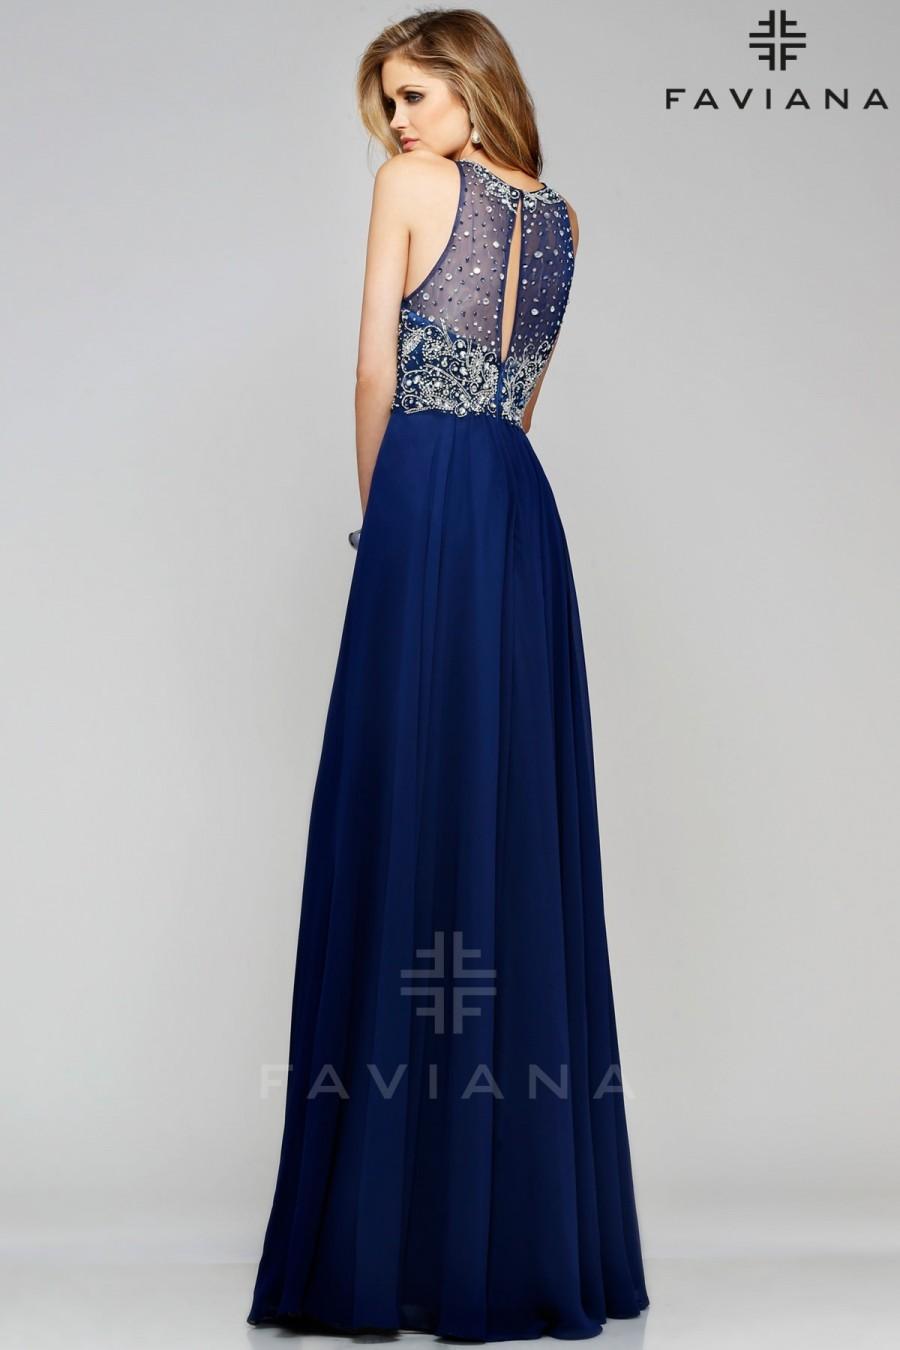 Mariage - Faviana S7560 Beaded Chiffon Evening Gown - 2016 Spring Trends Dresses